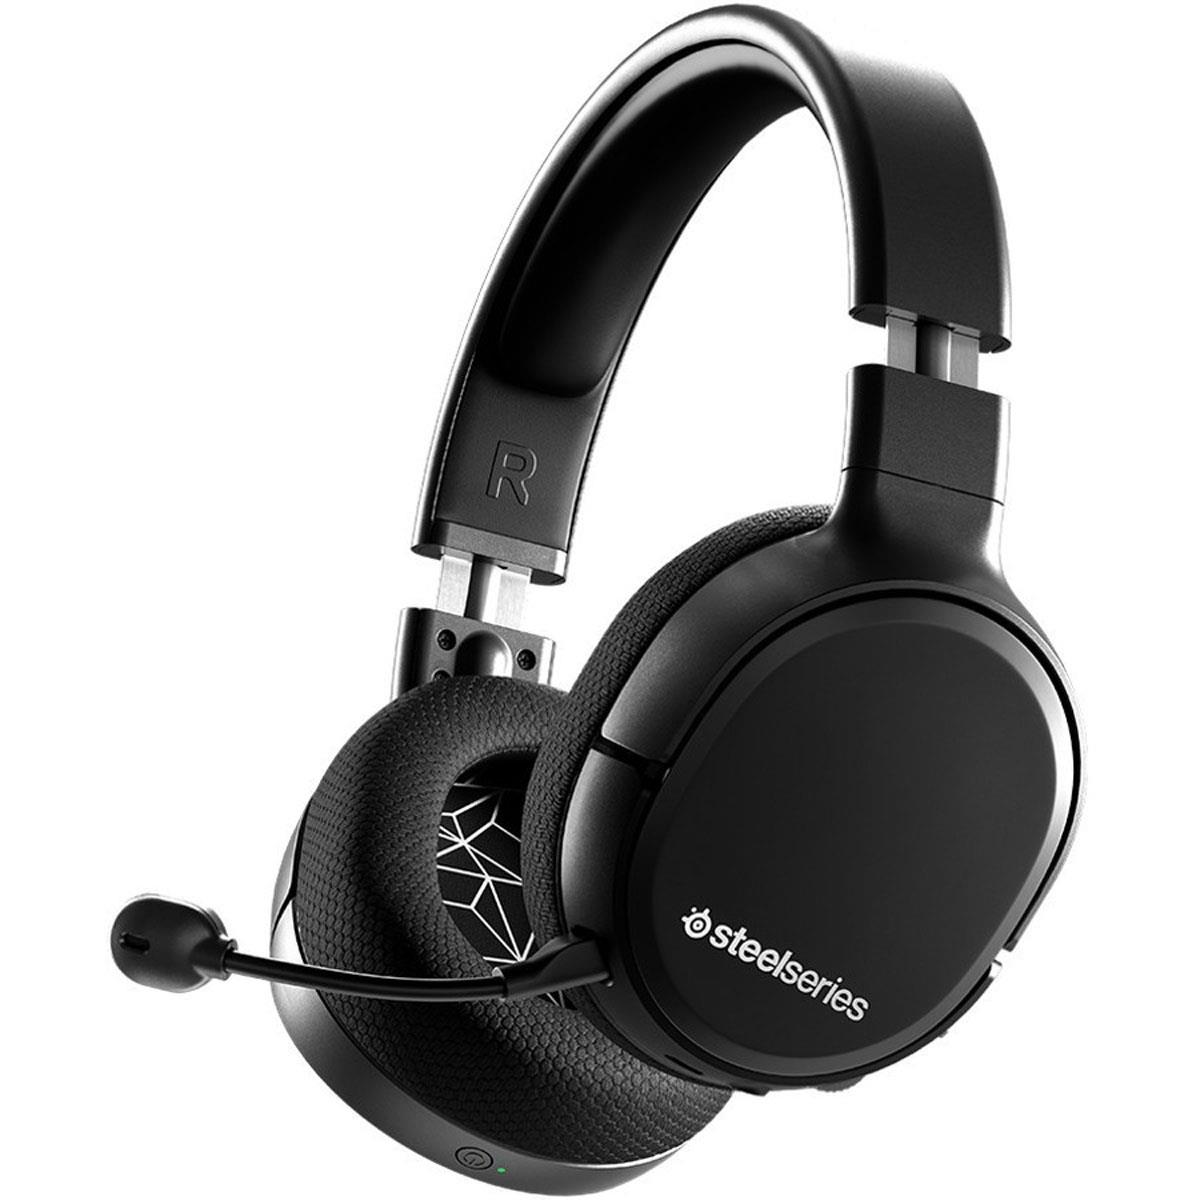 SteelSeries Arctis 1 Wireless 4-in-1 Gaming Headset $55 + free s/h at Adorama